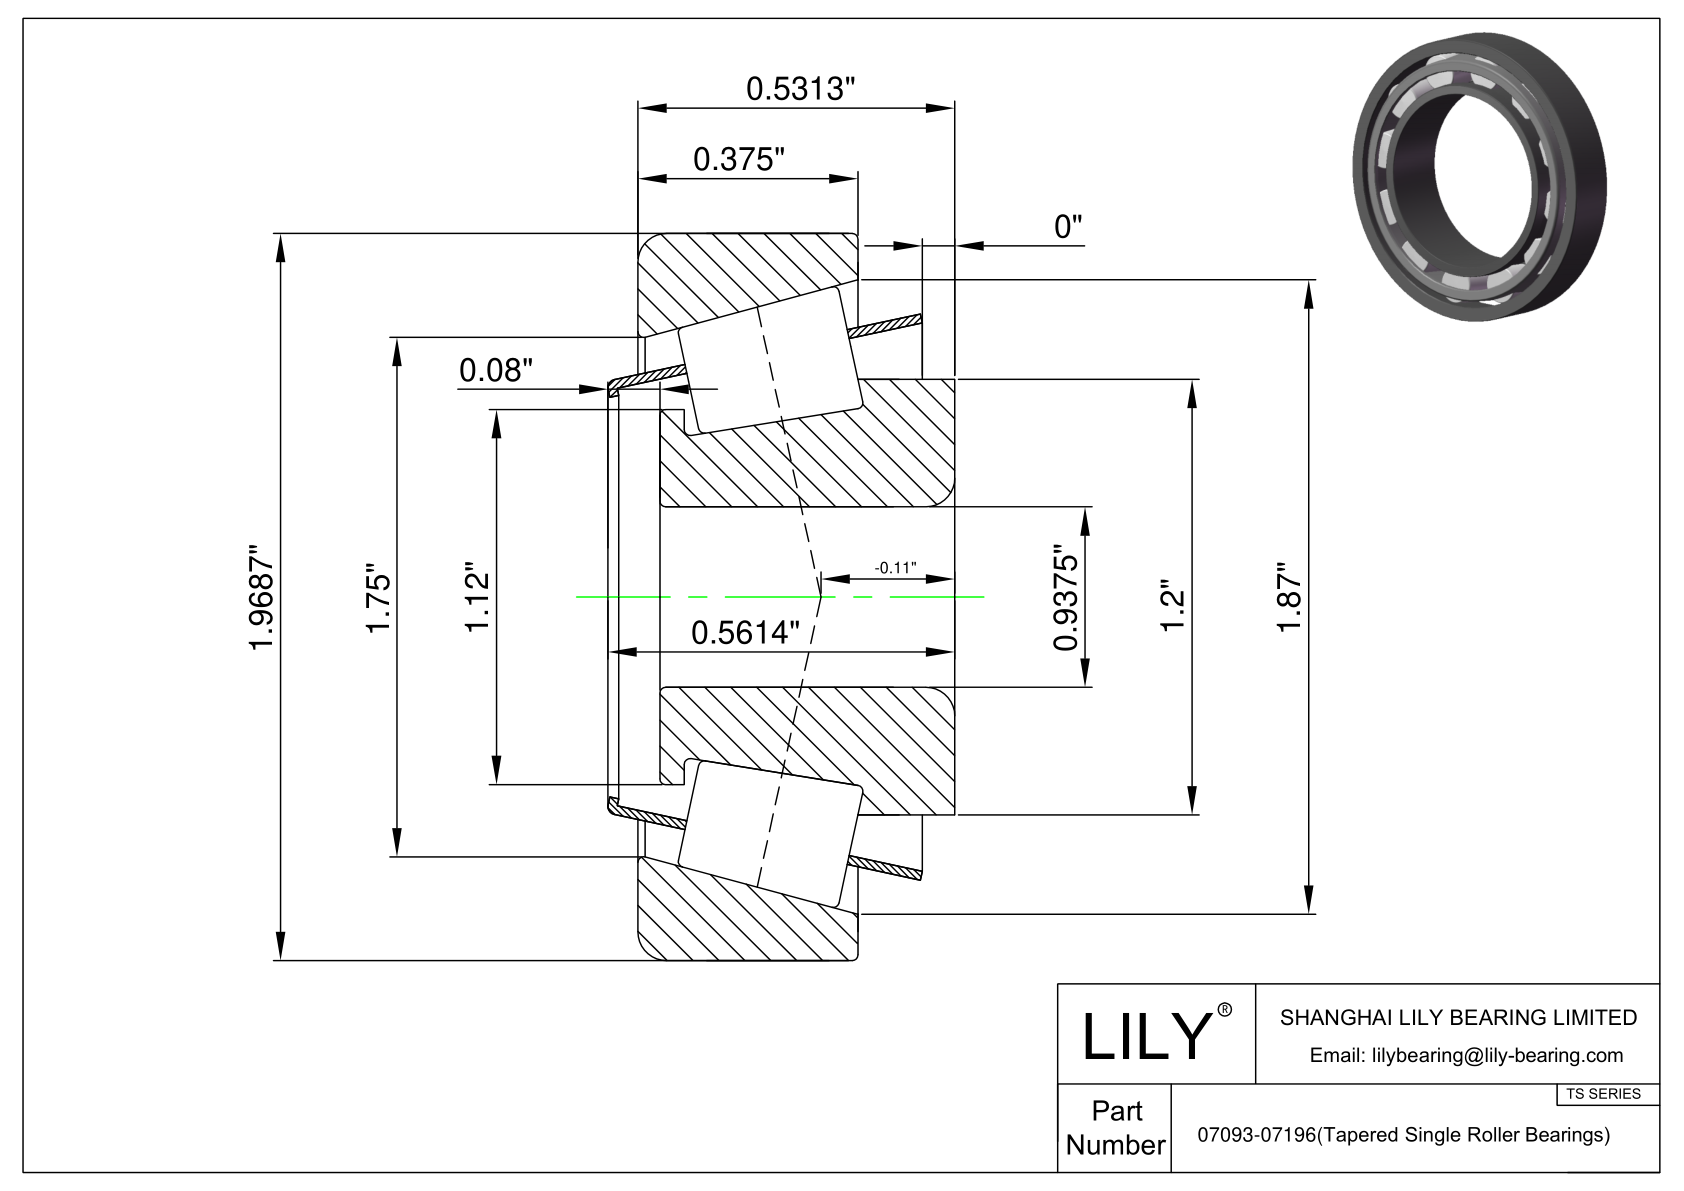 07093-07196 TS (Tapered Single Roller Bearings) (Imperial) cad drawing